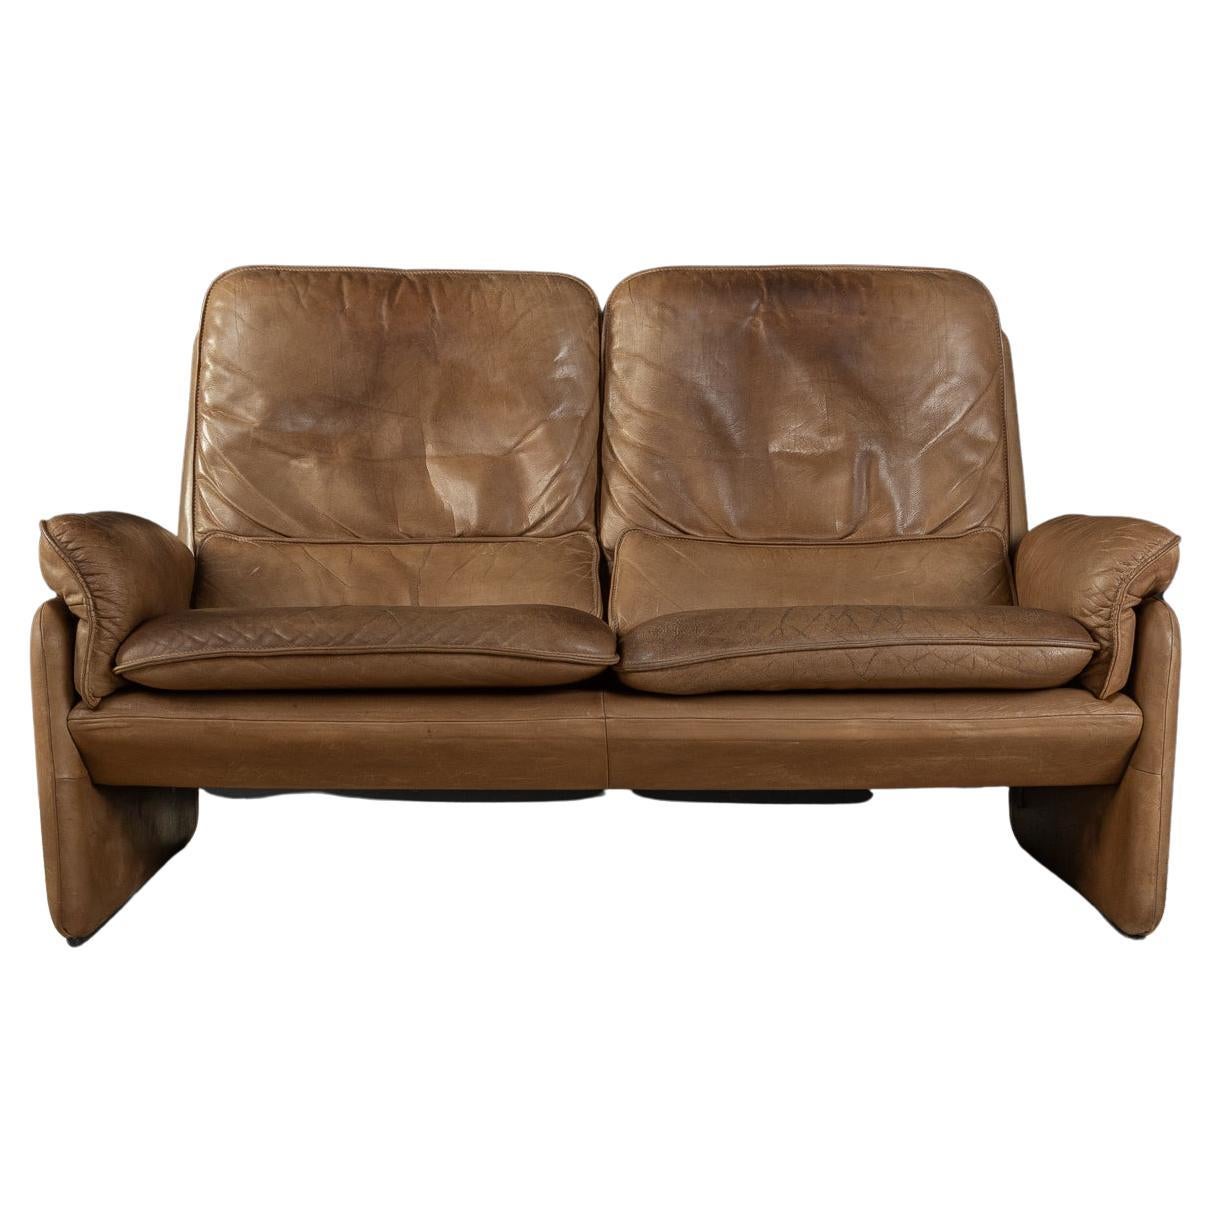 70s Sofa by De Sede Model DS-61 Buffalo Leather For Sale